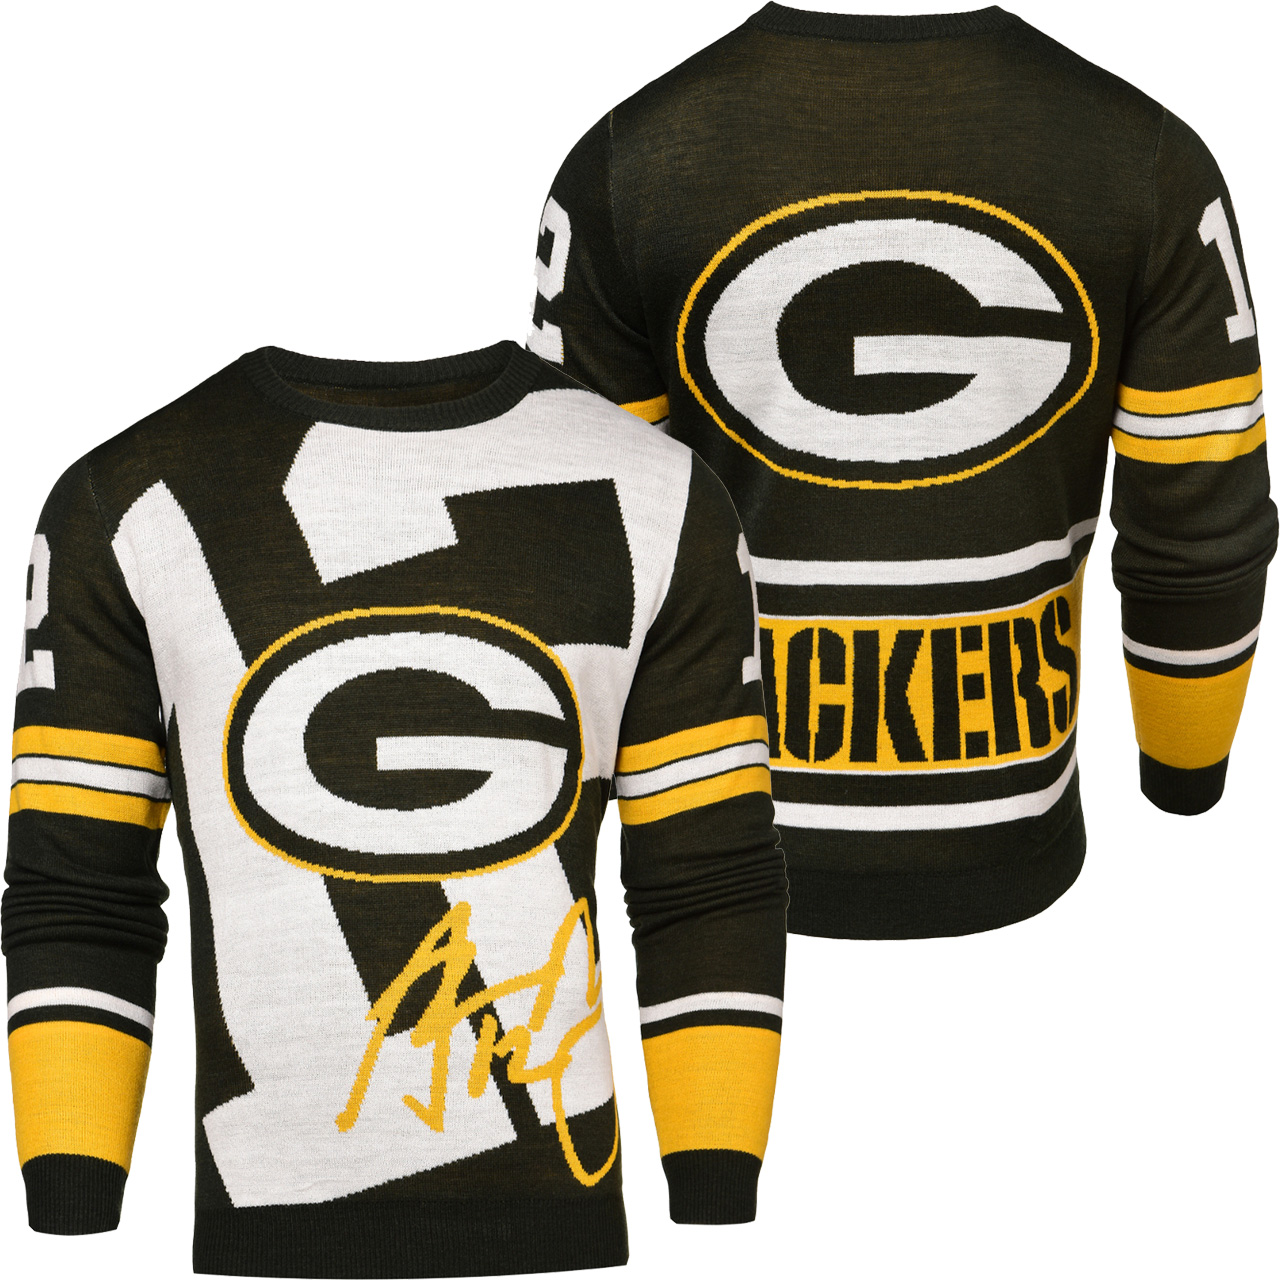 Aaron Rodgers #12 Green Bay Packers NFL Loud Player Sweater